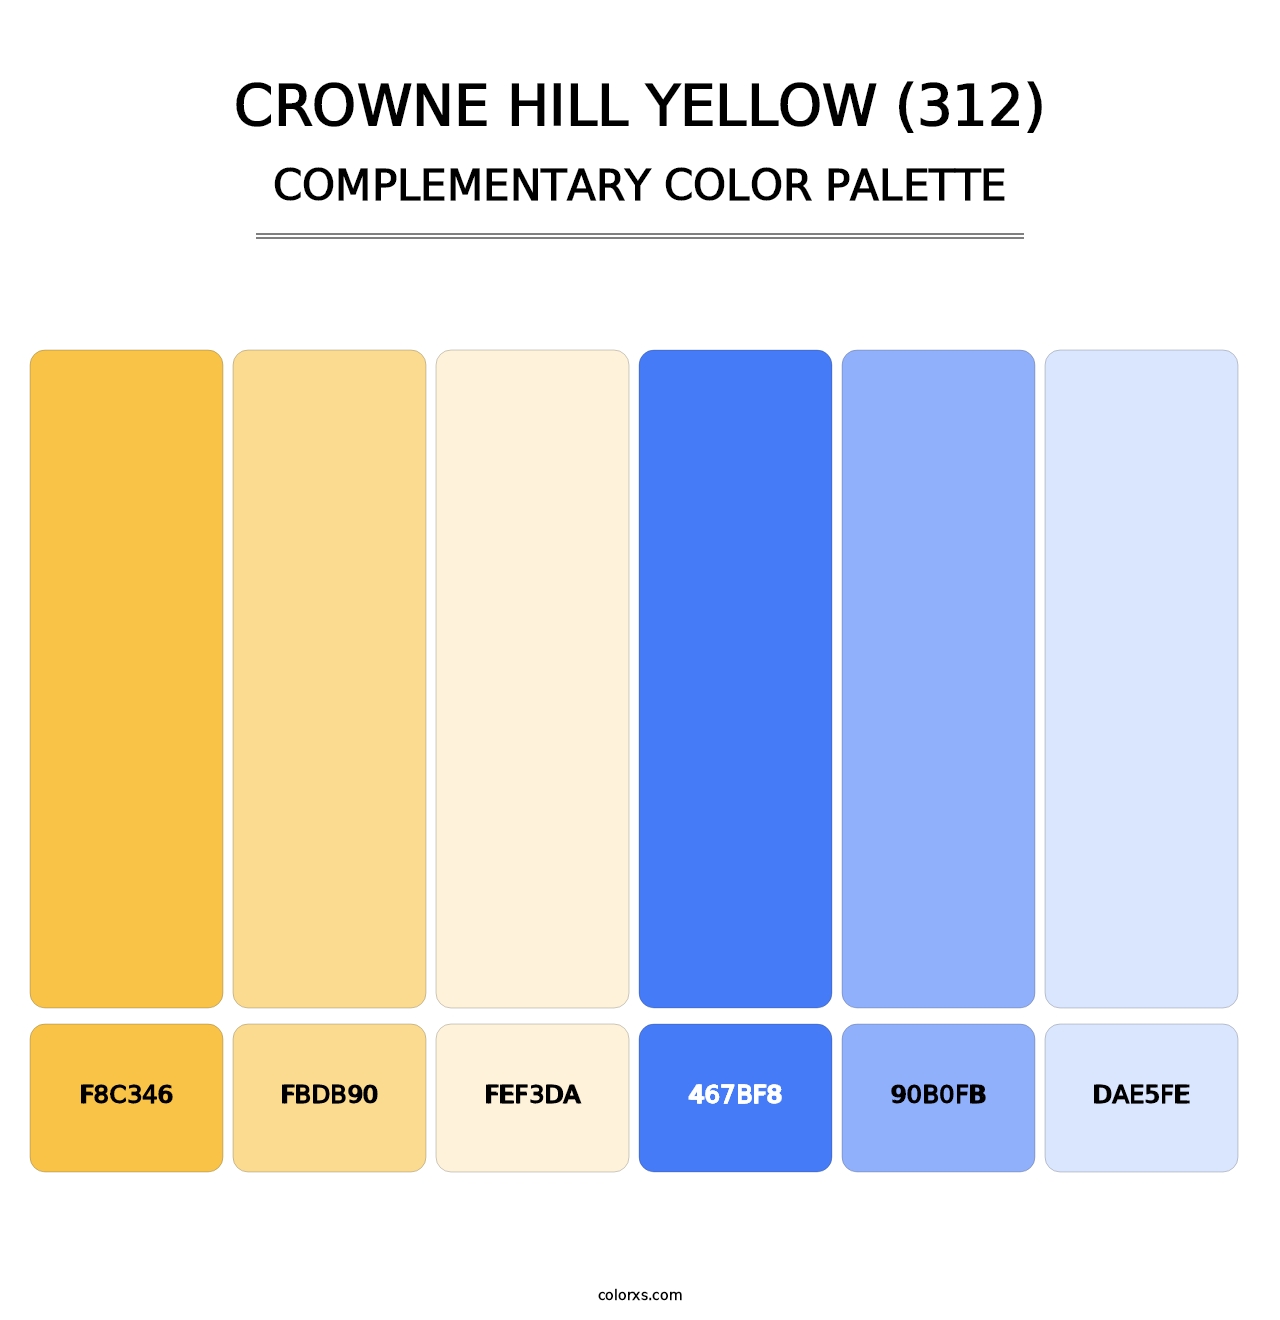 Crowne Hill Yellow (312) - Complementary Color Palette